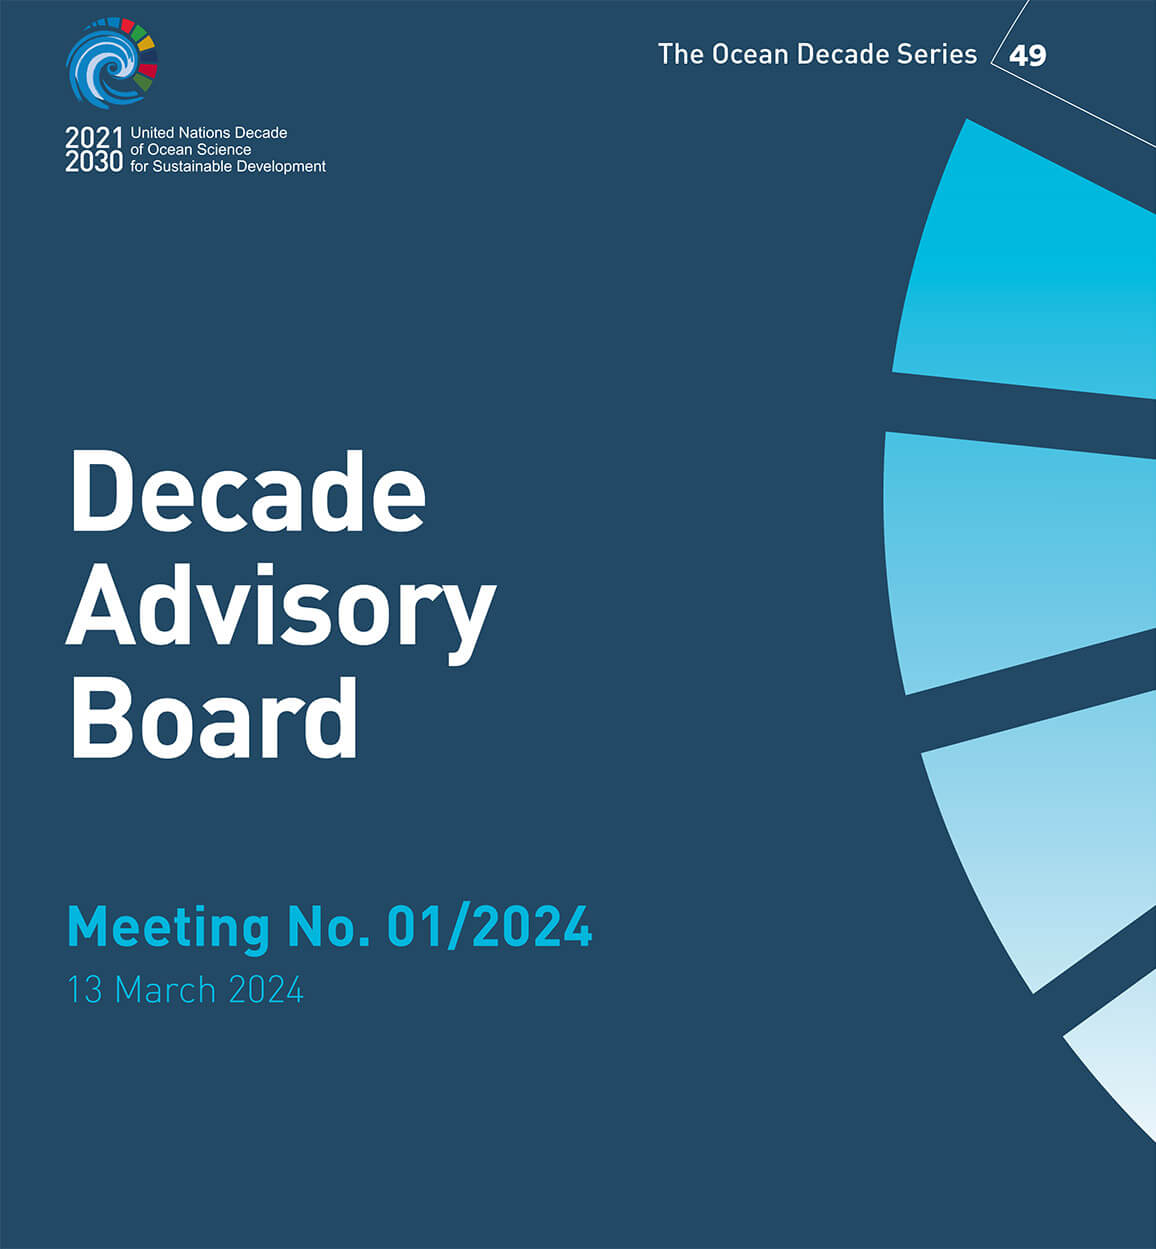 Report of the Eighth meeting of the Decade Advisory Board (13 Maret 2024)